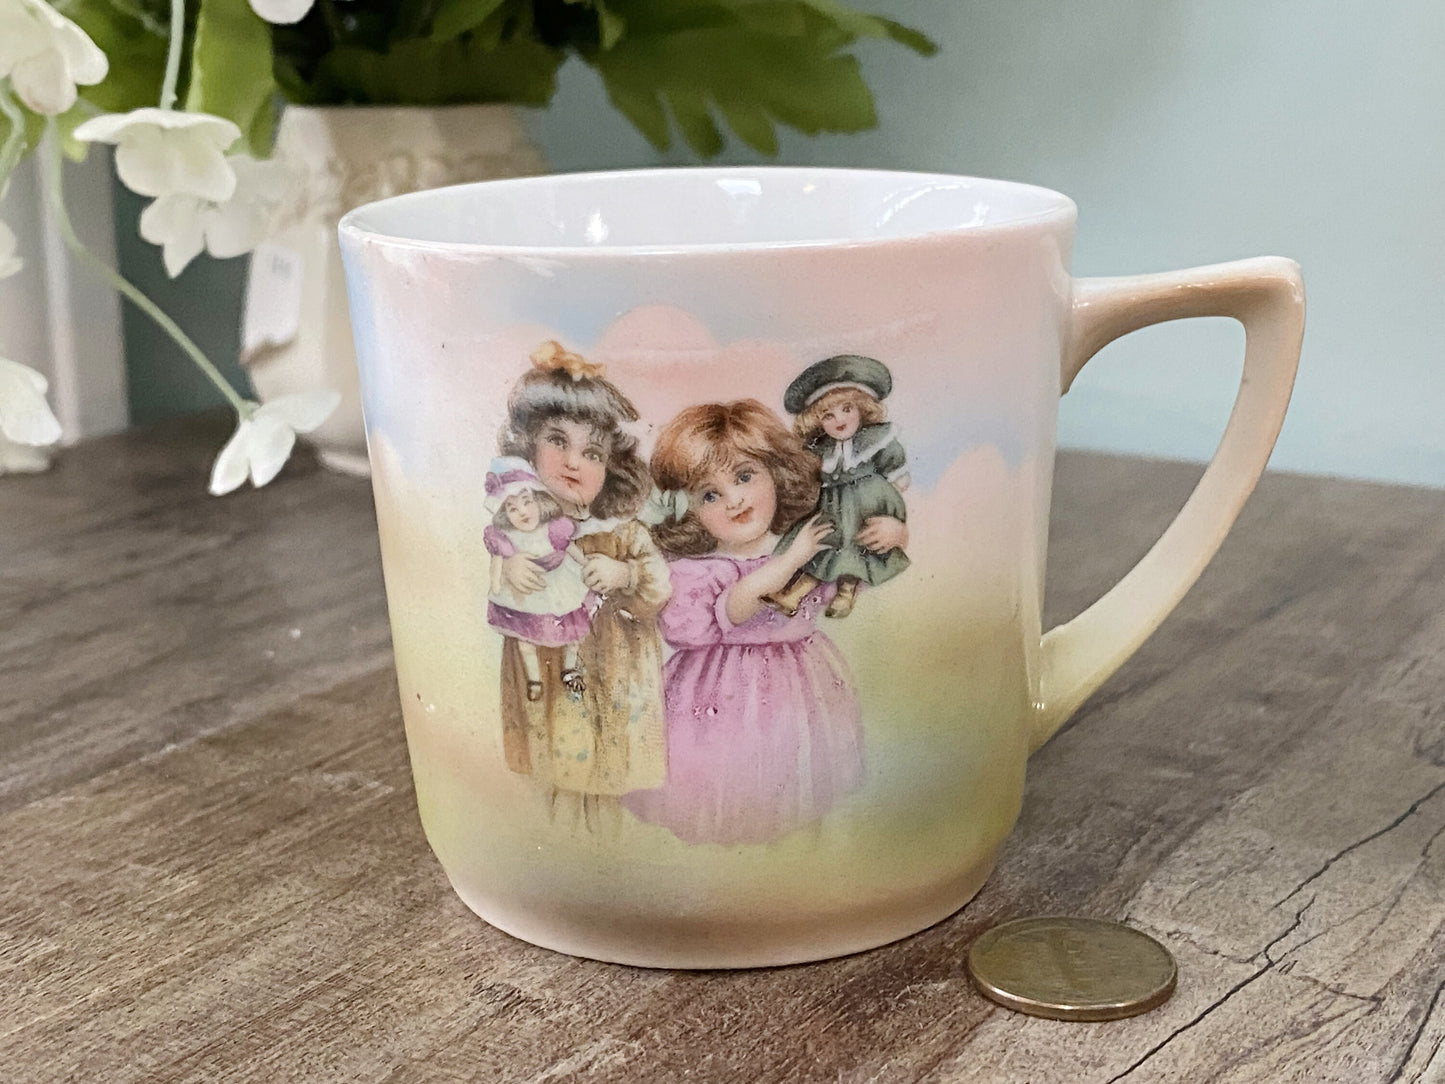 Antique Childs Cup Made in Germany